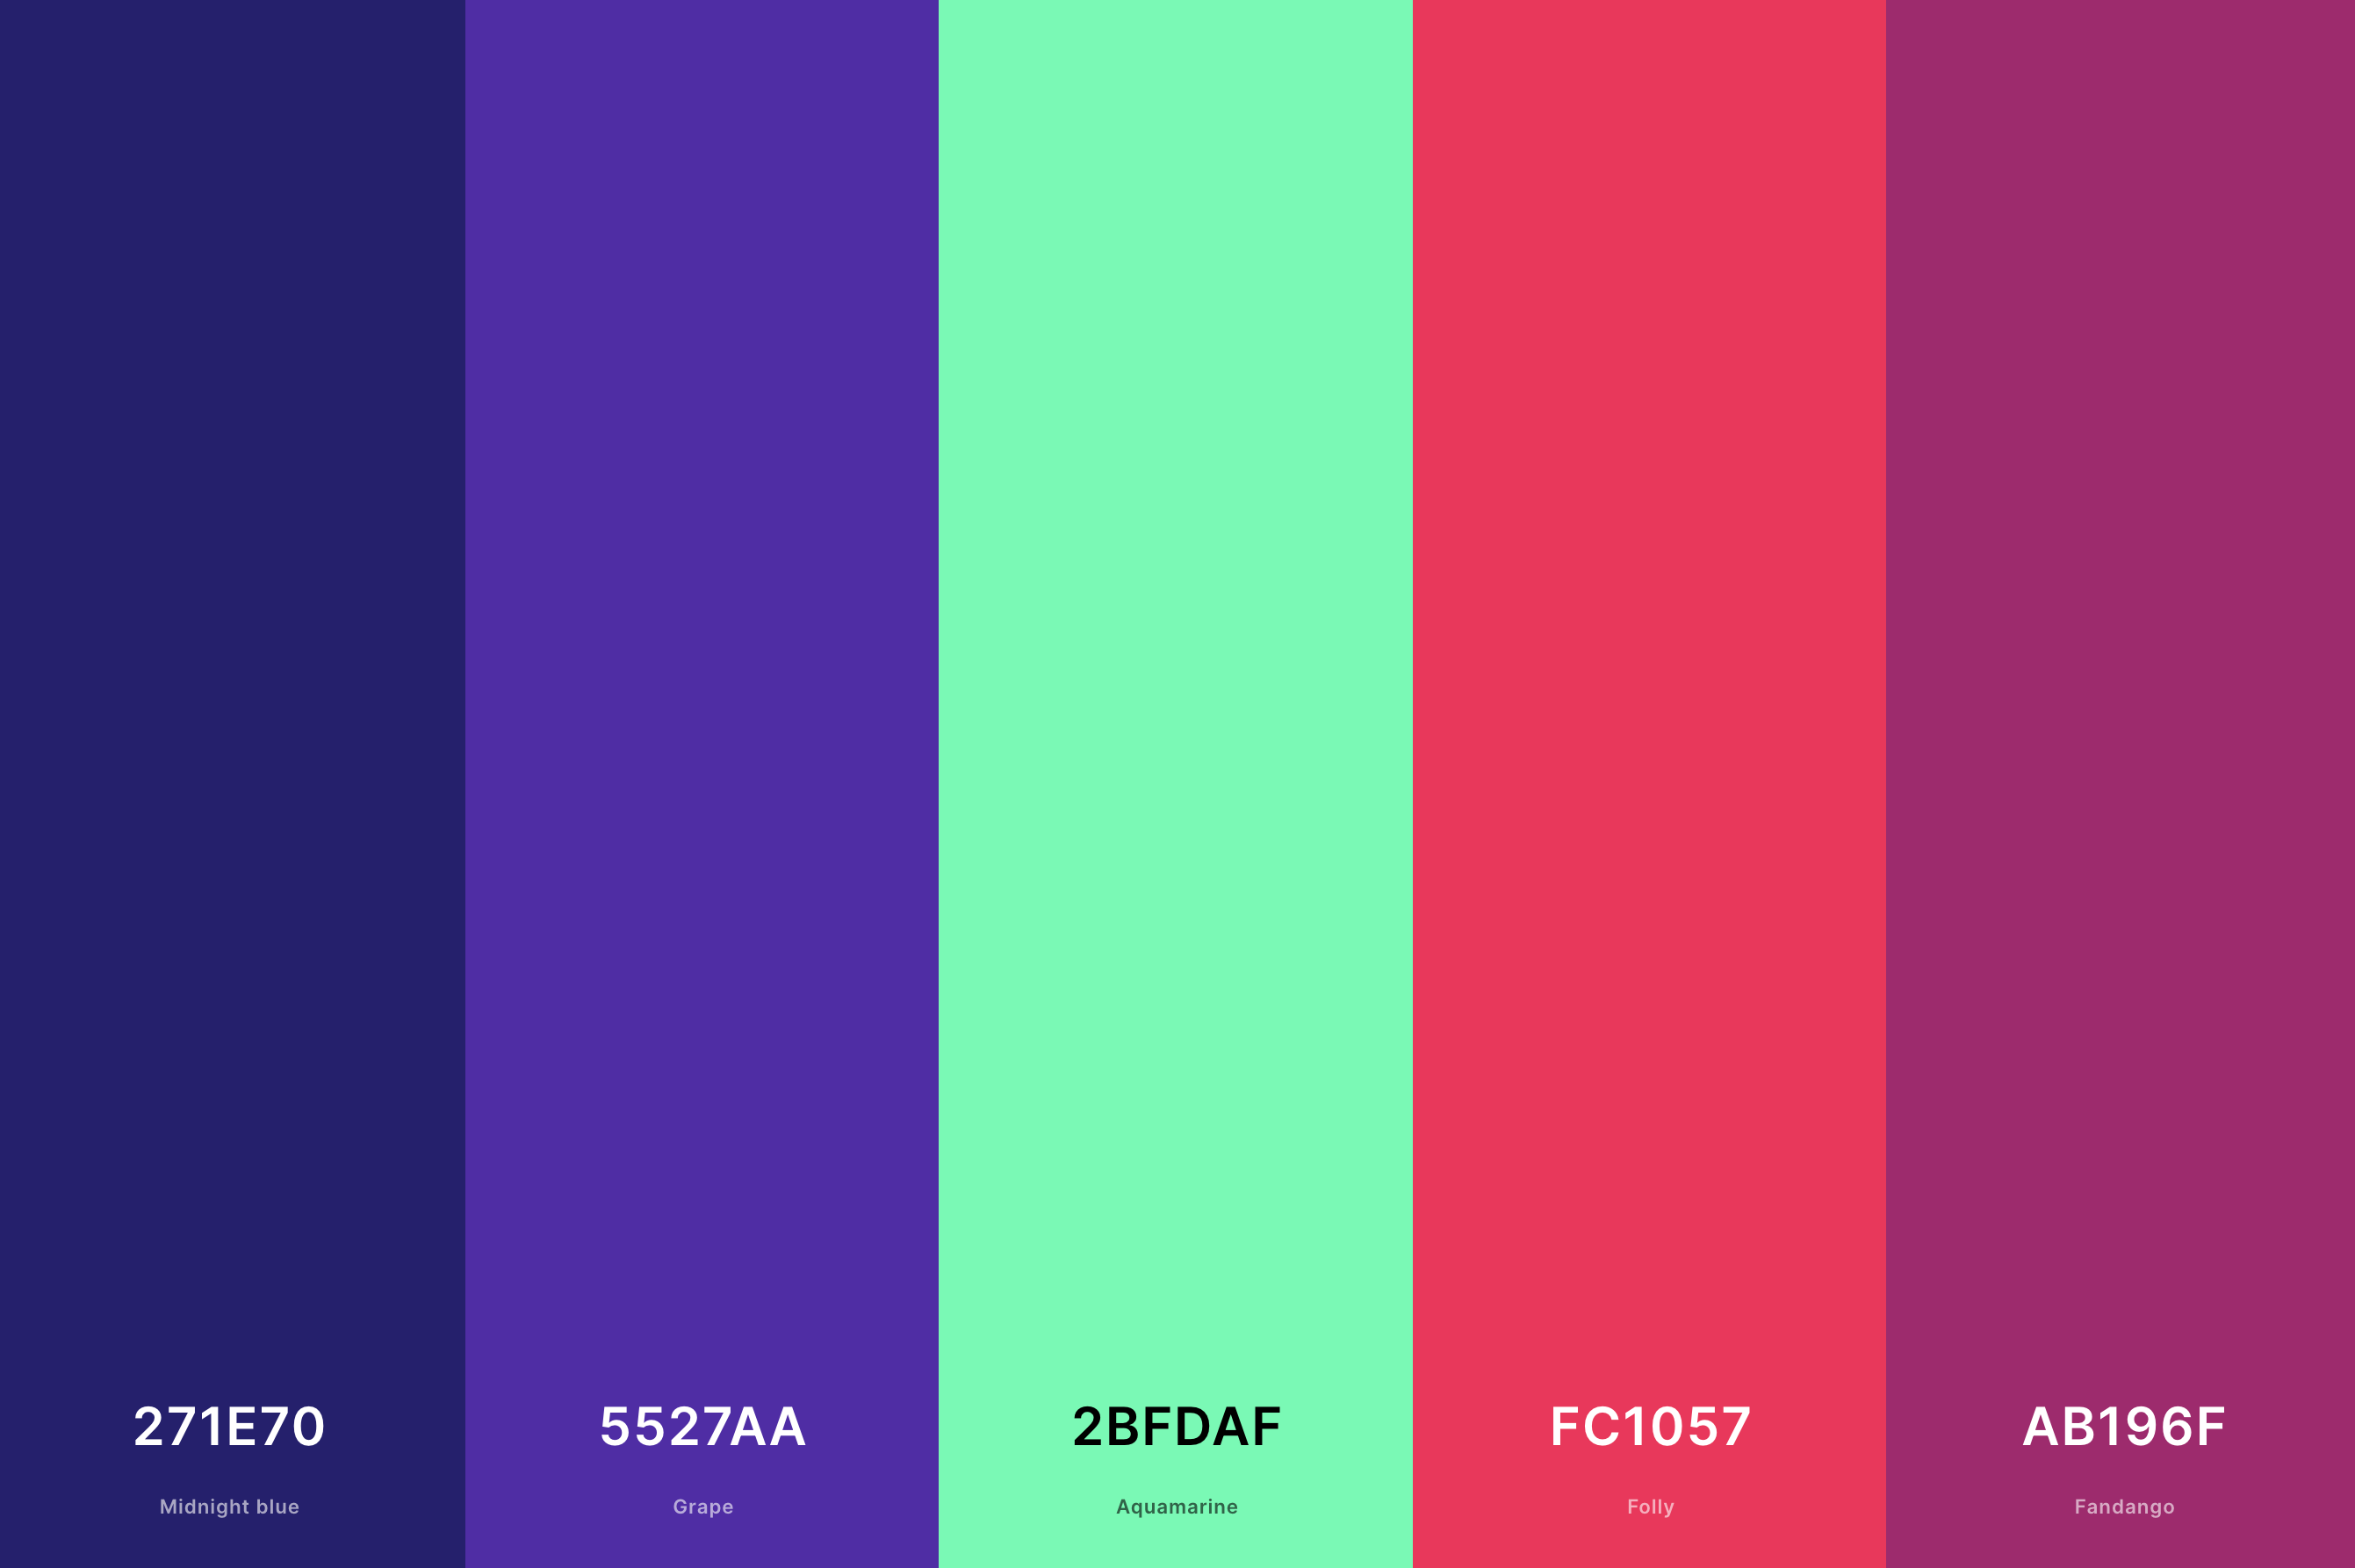 26. Retro Game Color Palette Color Palette with Midnight Blue (Hex #271E70) + Grape (Hex #5527AA) + Aquamarine (Hex #2BFDAF) + Folly (Hex #FC1057) + Fandango (Hex #AB196F) Color Palette with Hex Codes